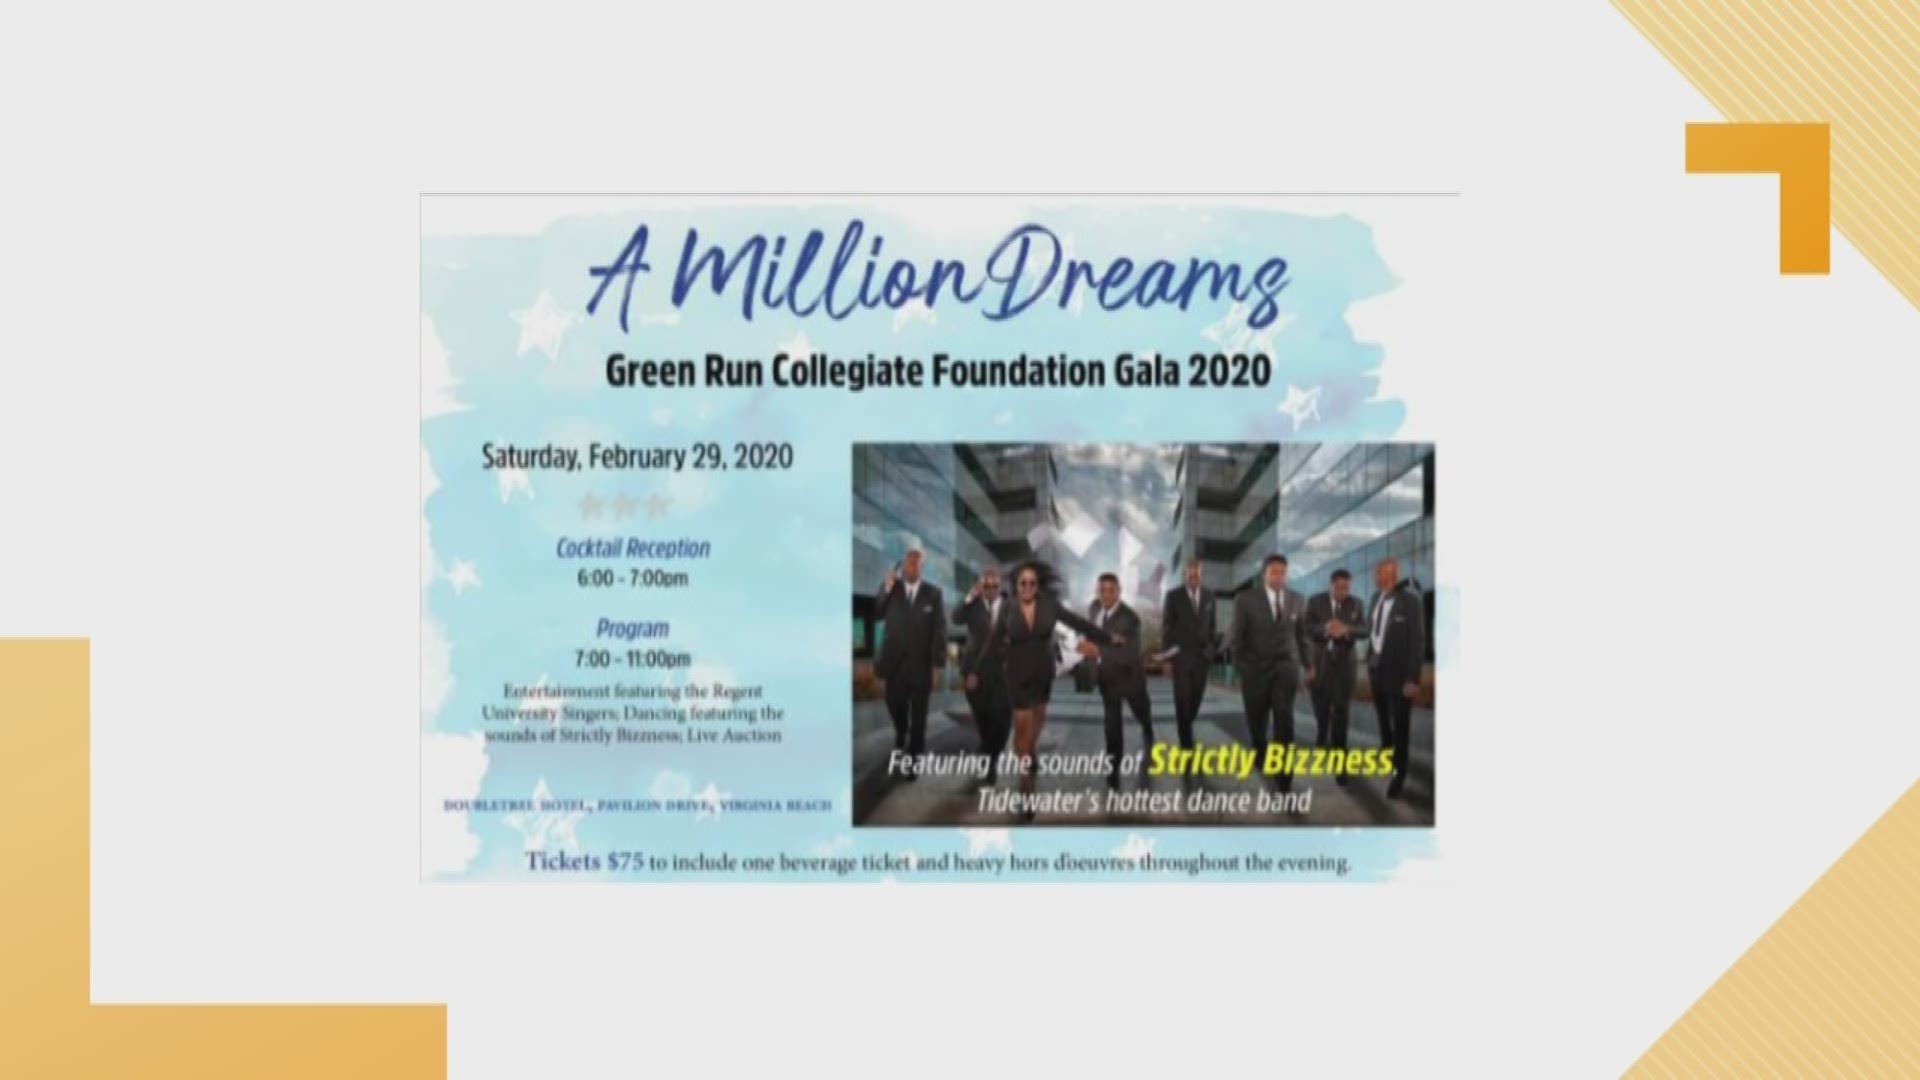 13News Now Ashley Smith sits down with Joe Burnsworth and Rianne Patricio to talk about the gala that builds community support for Green Run collegiate students.